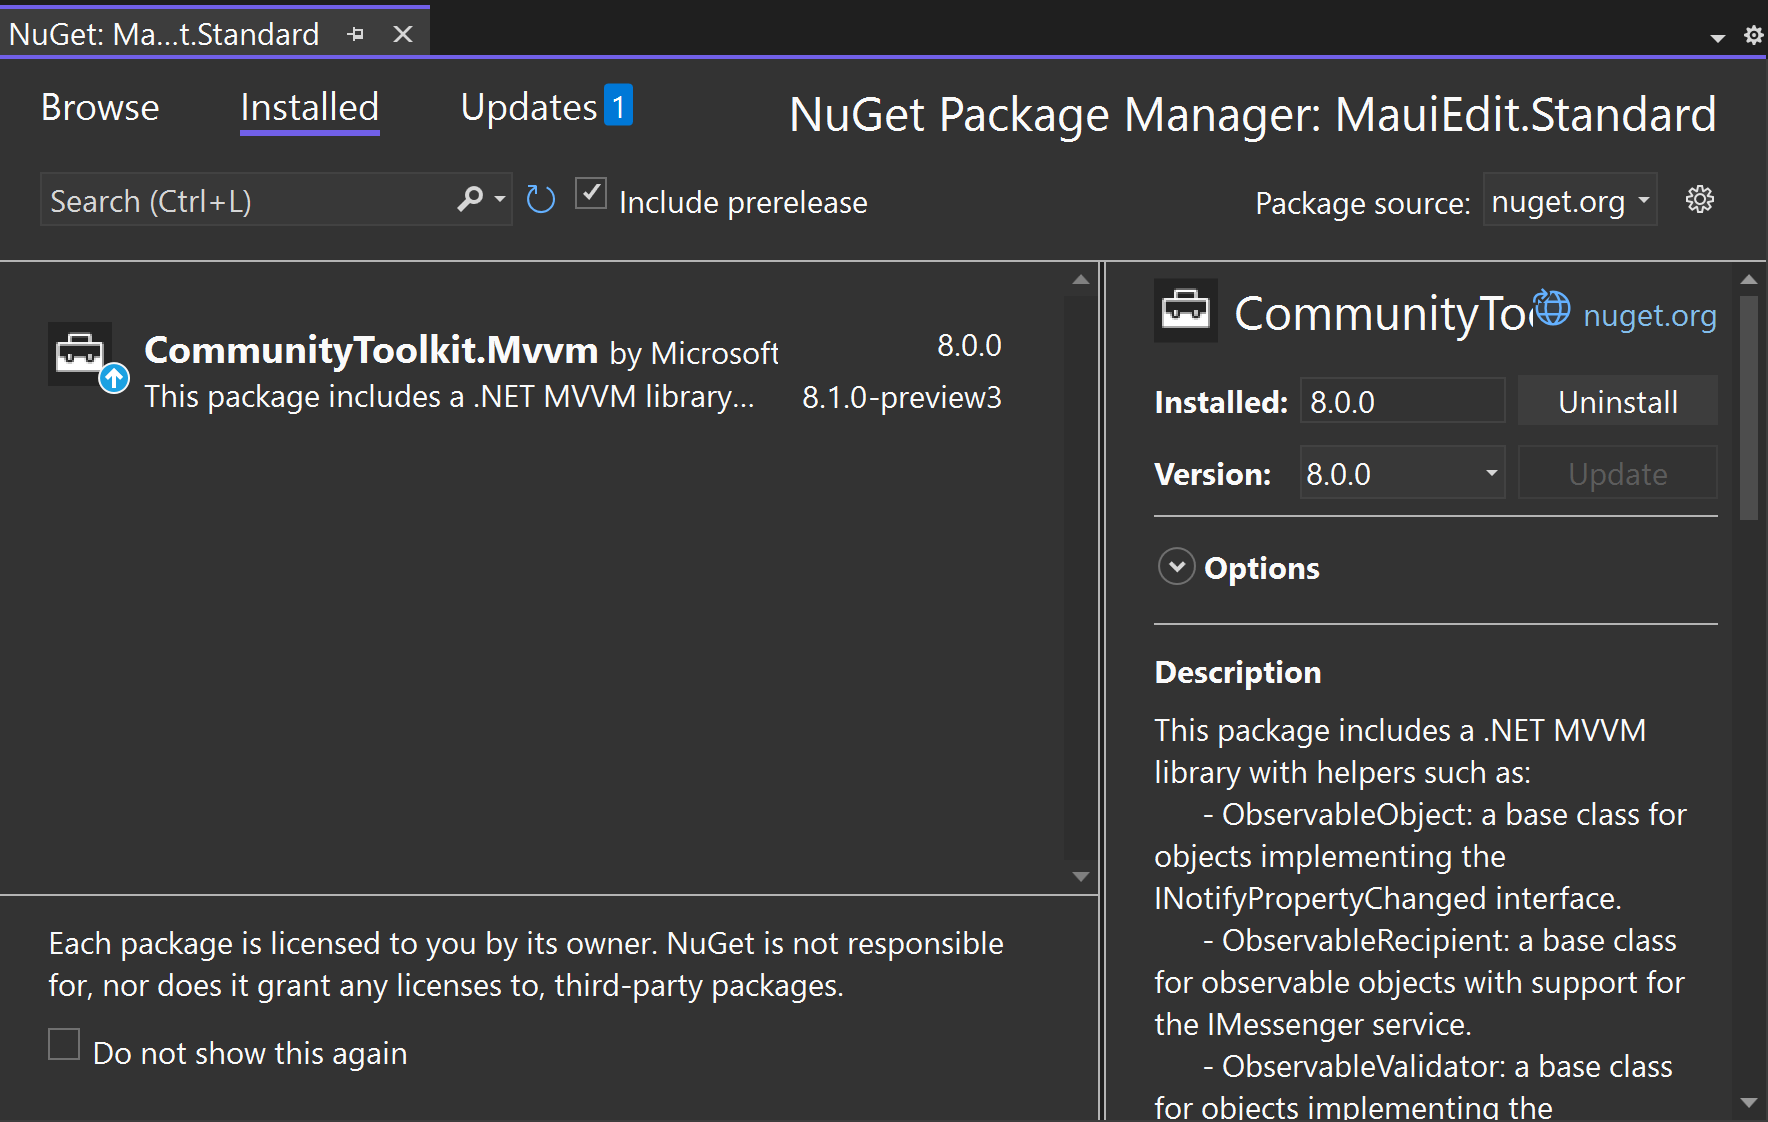 Screenshot showing how to add the Microsoft CommunityToolkit.MVVM package to a project